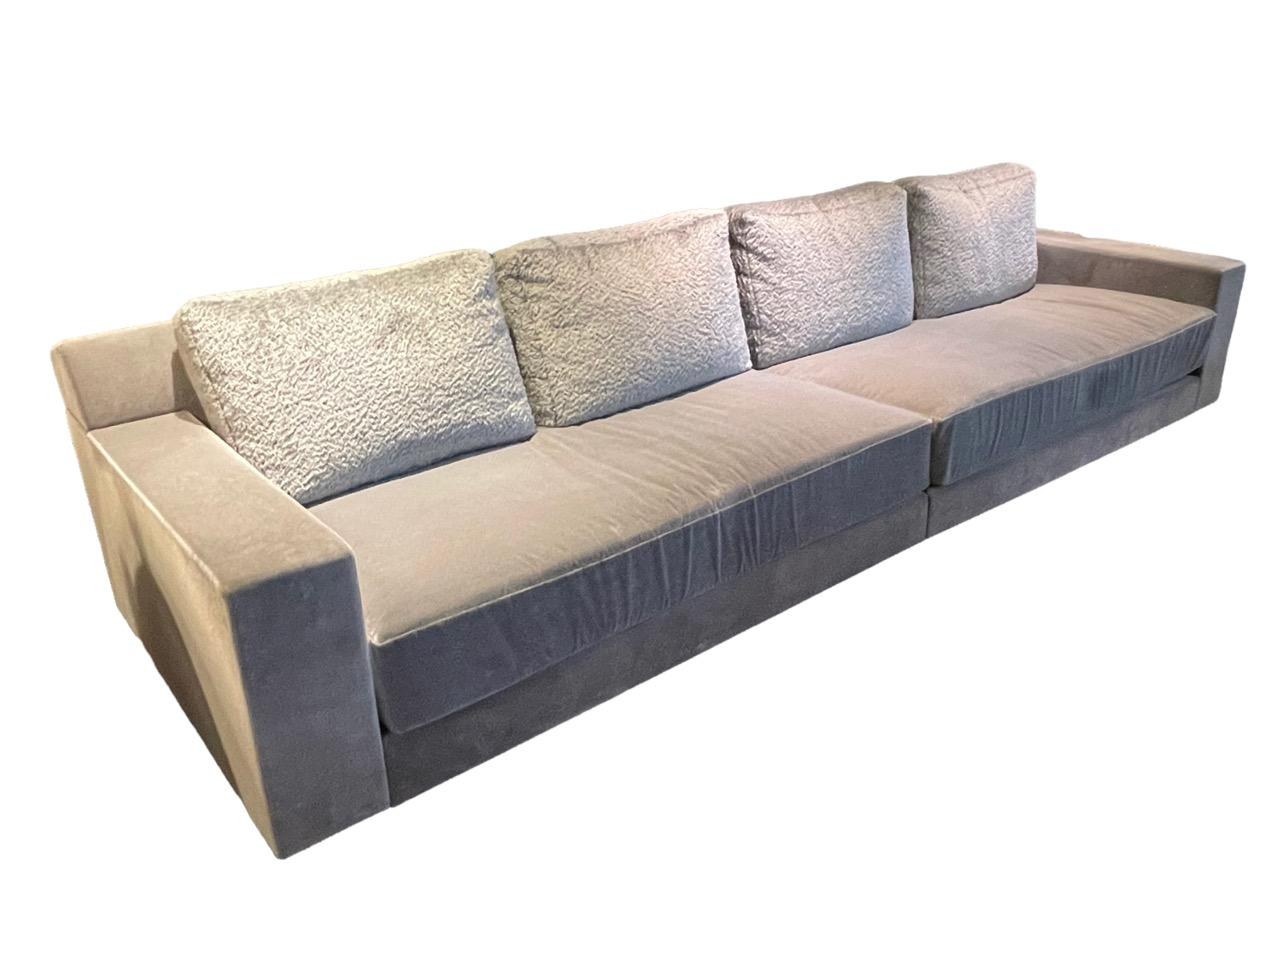 Contemporary sofa designed by Holly Hunt. Its clean-lined silhouette and modern design make it very stylish. It has been upholstered in a Holly Hunt gray mohair fabric and high-durability velvet called Mammoth. The legs are custom-made in bronze.
 